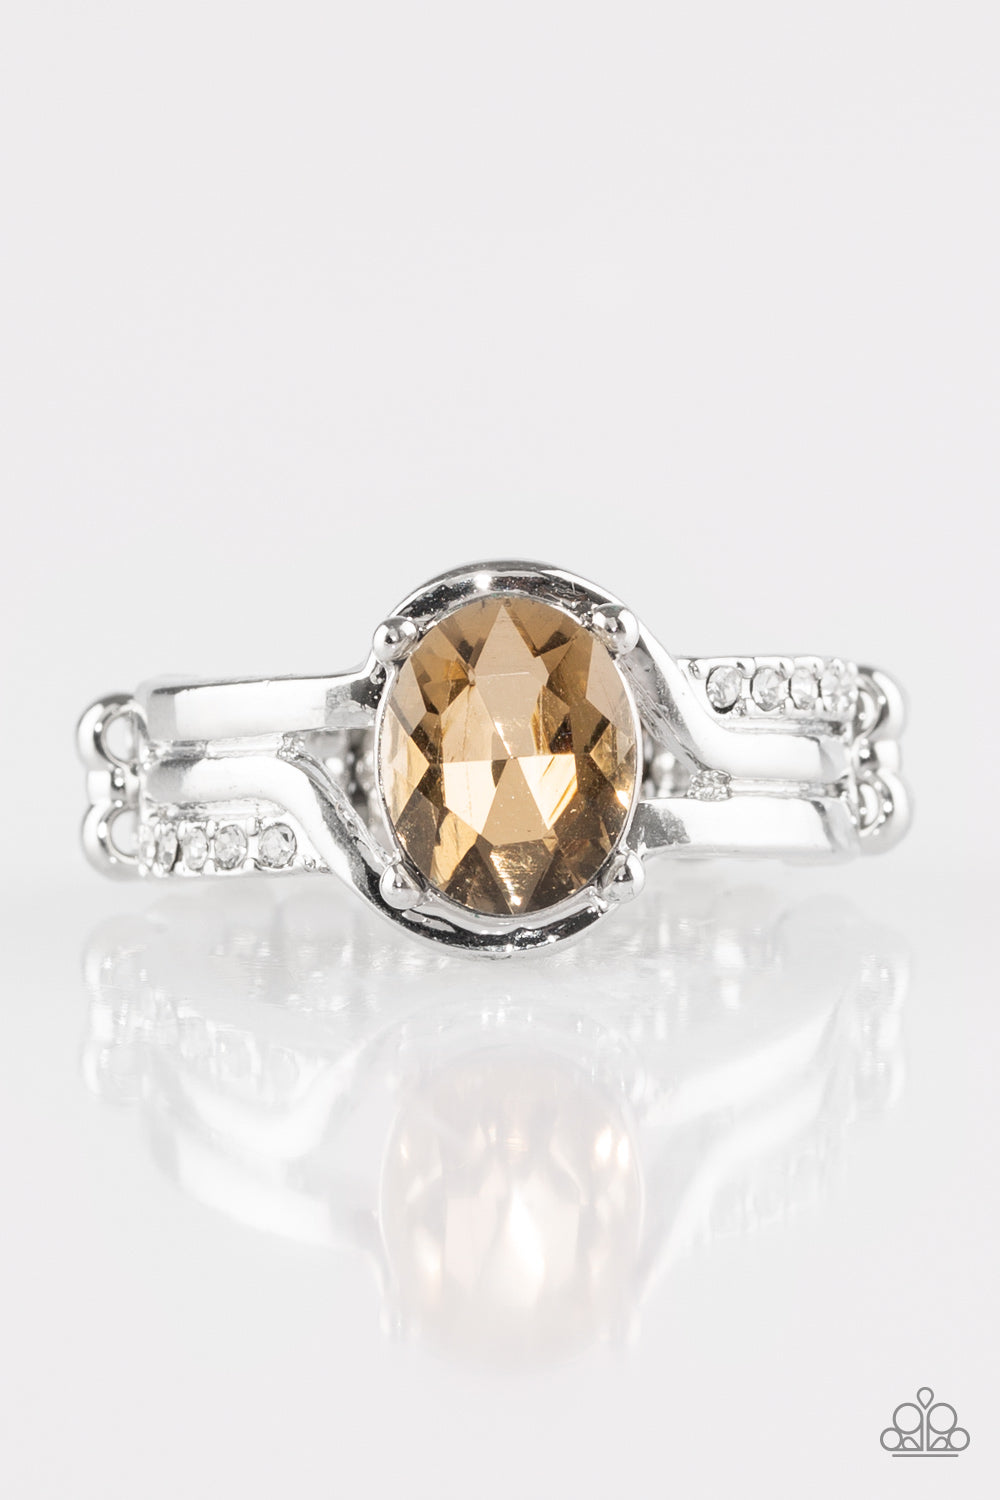 HOME IS WHERE THE CASTLE IS - BROWN TOPAZ RHINESTONE OVAL RING